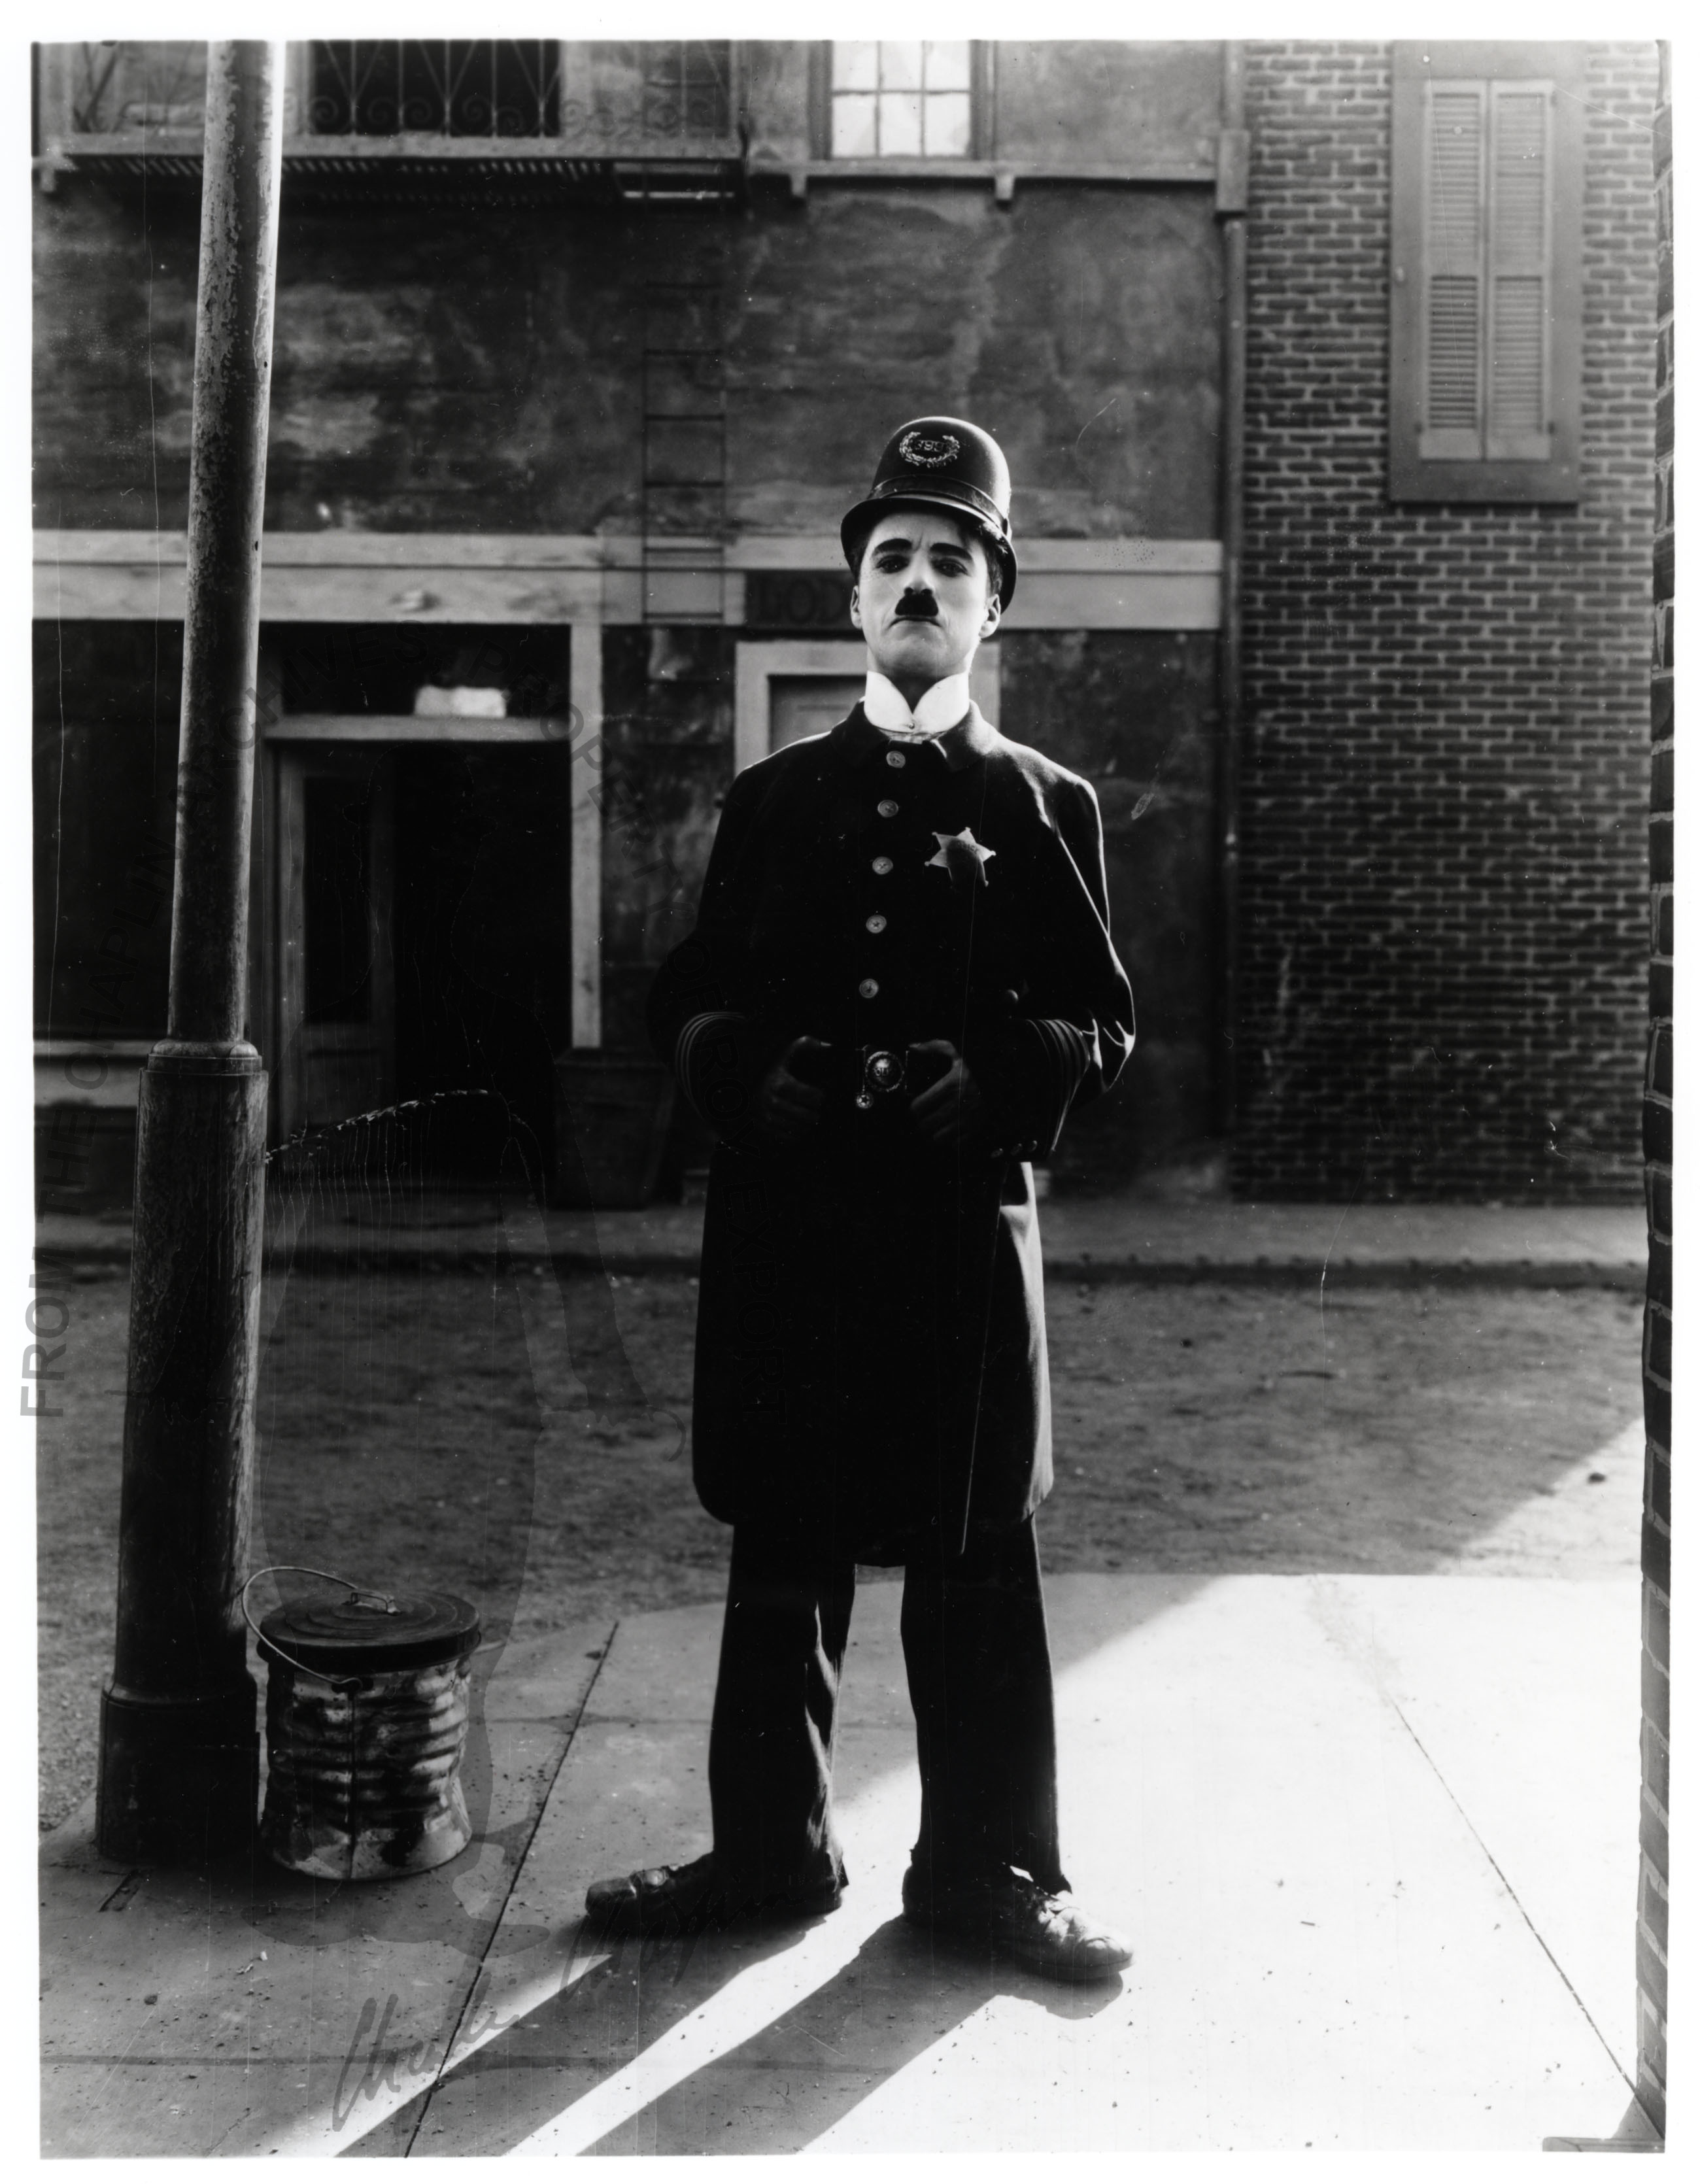 Sinis teleskop søvn Search | Search | [The vagabond recruited to police force] | Charlie  Chaplin Archive